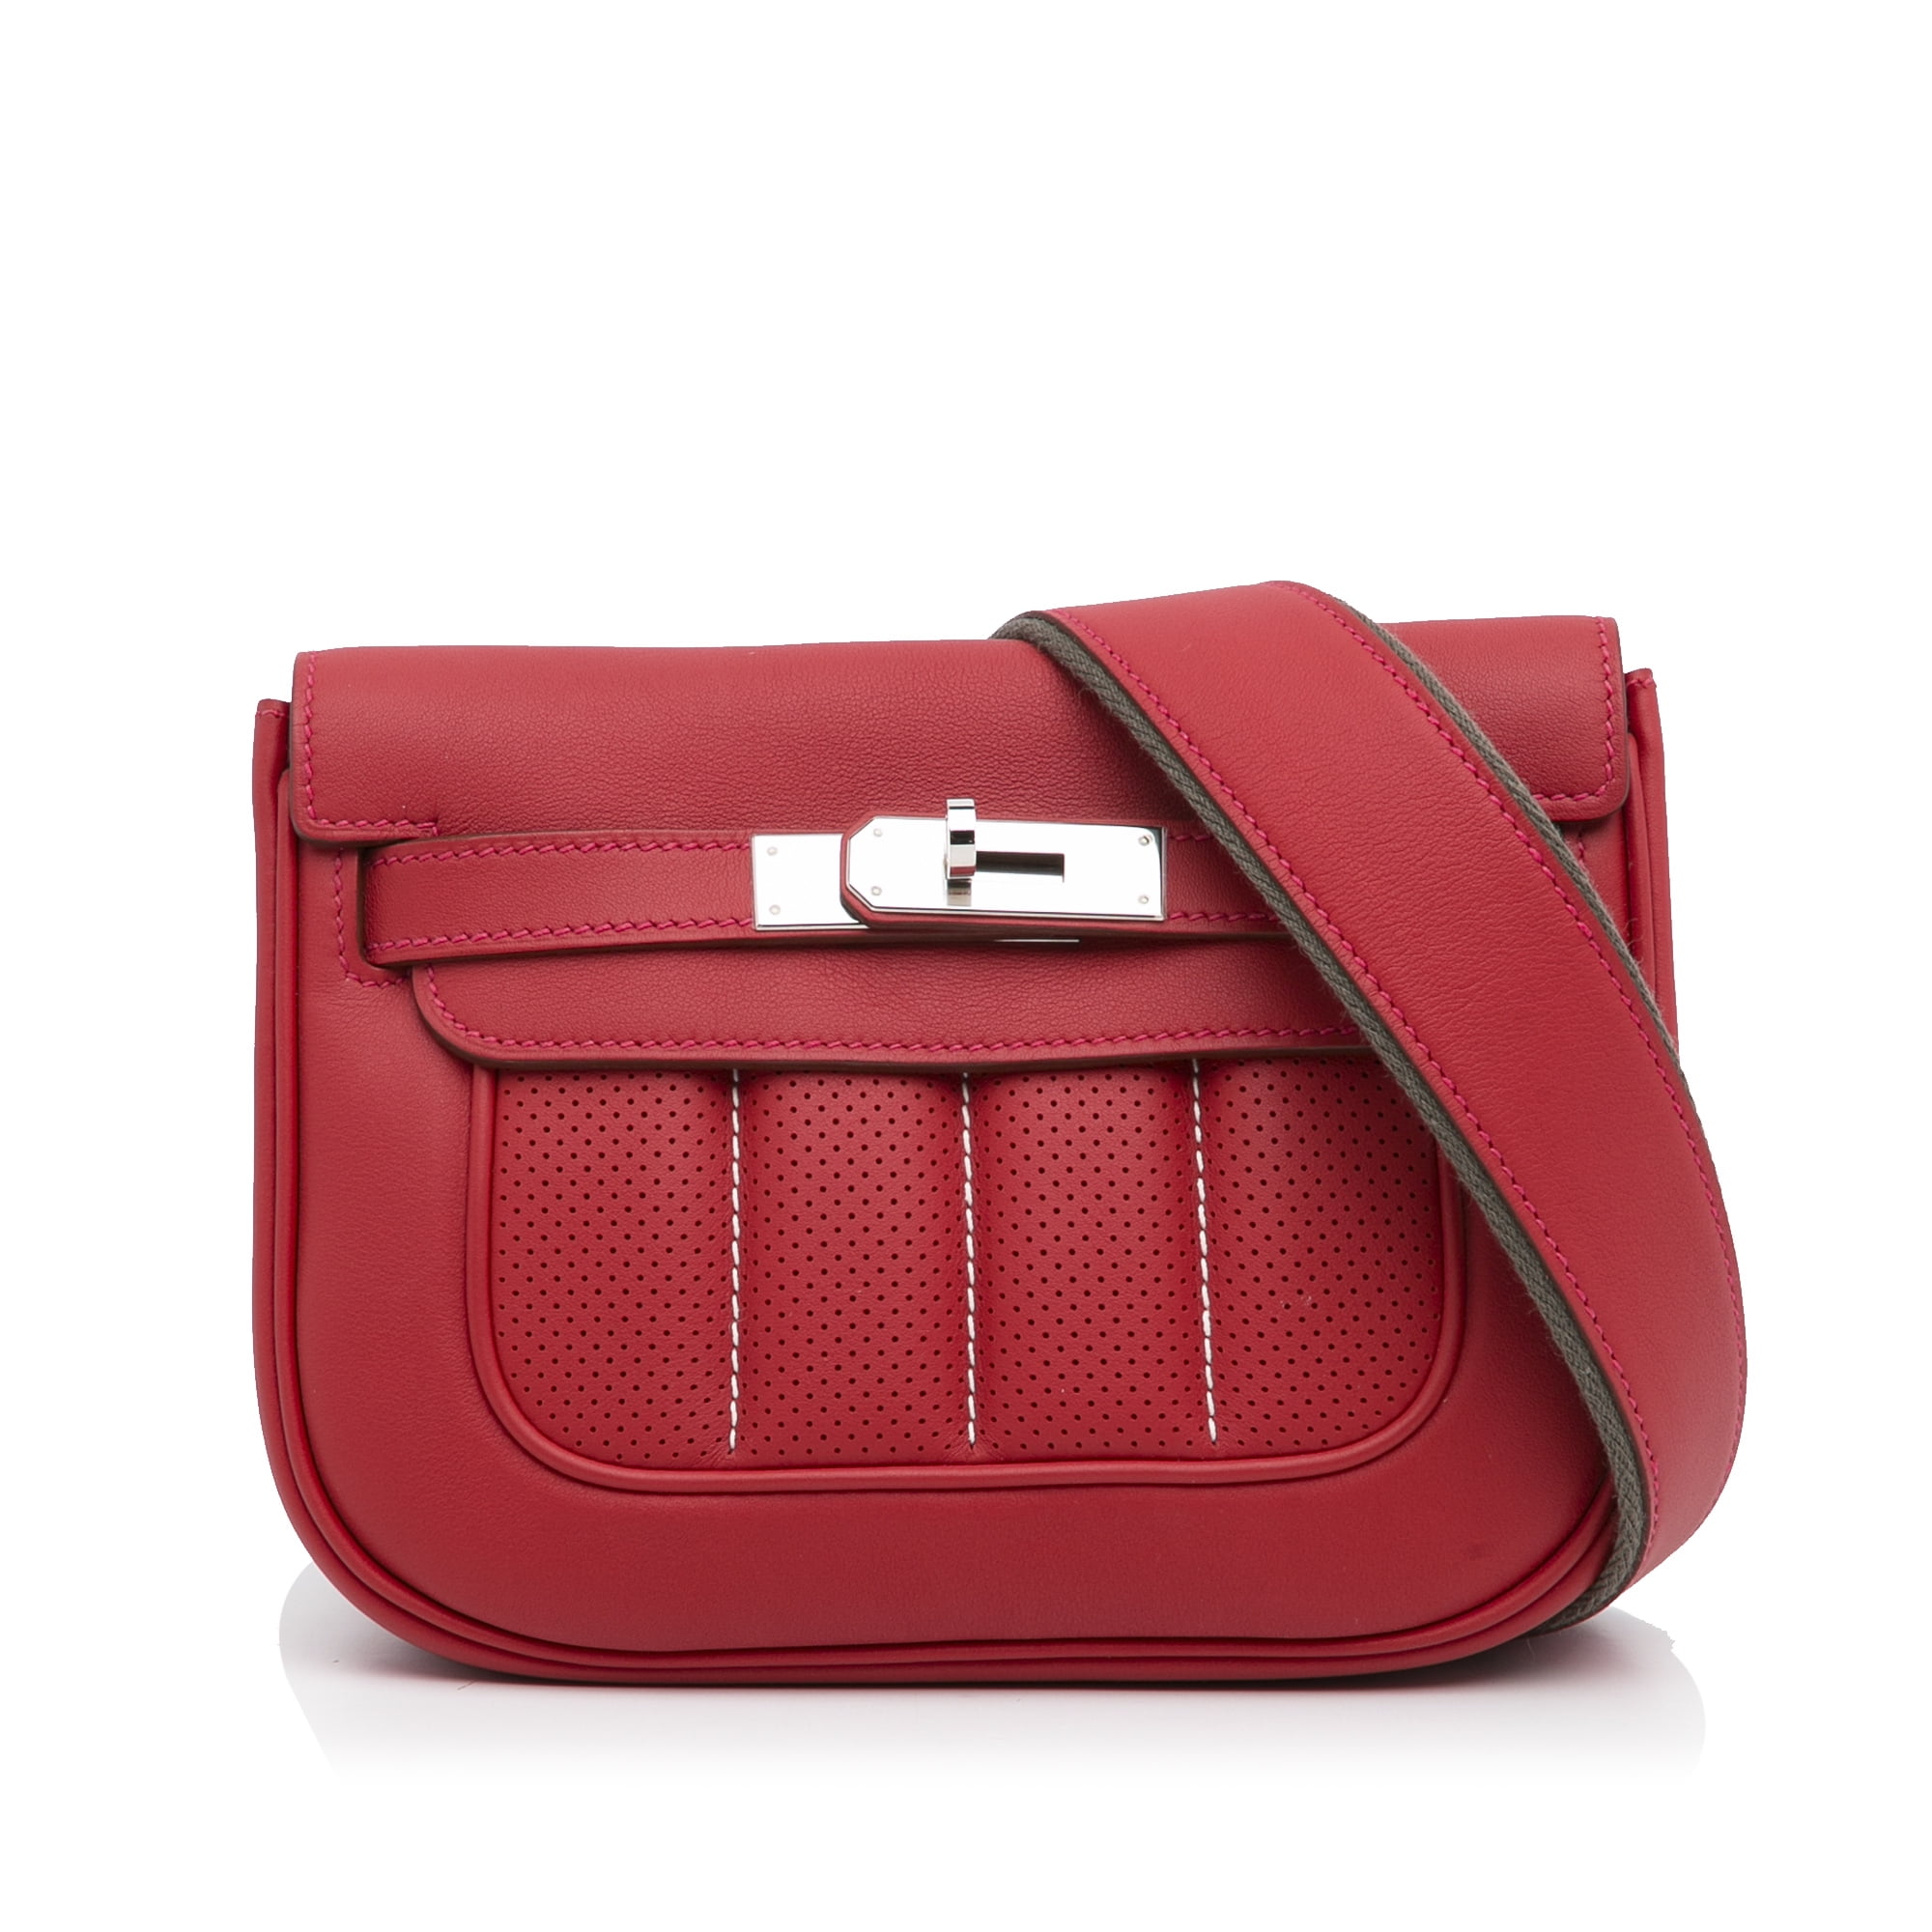 used Unisex Pre-owned Authenticated Hermes Mini Swift Berline Crossbody Calf Leather Red Crossbody Bag, Adult Unisex, Size: Small